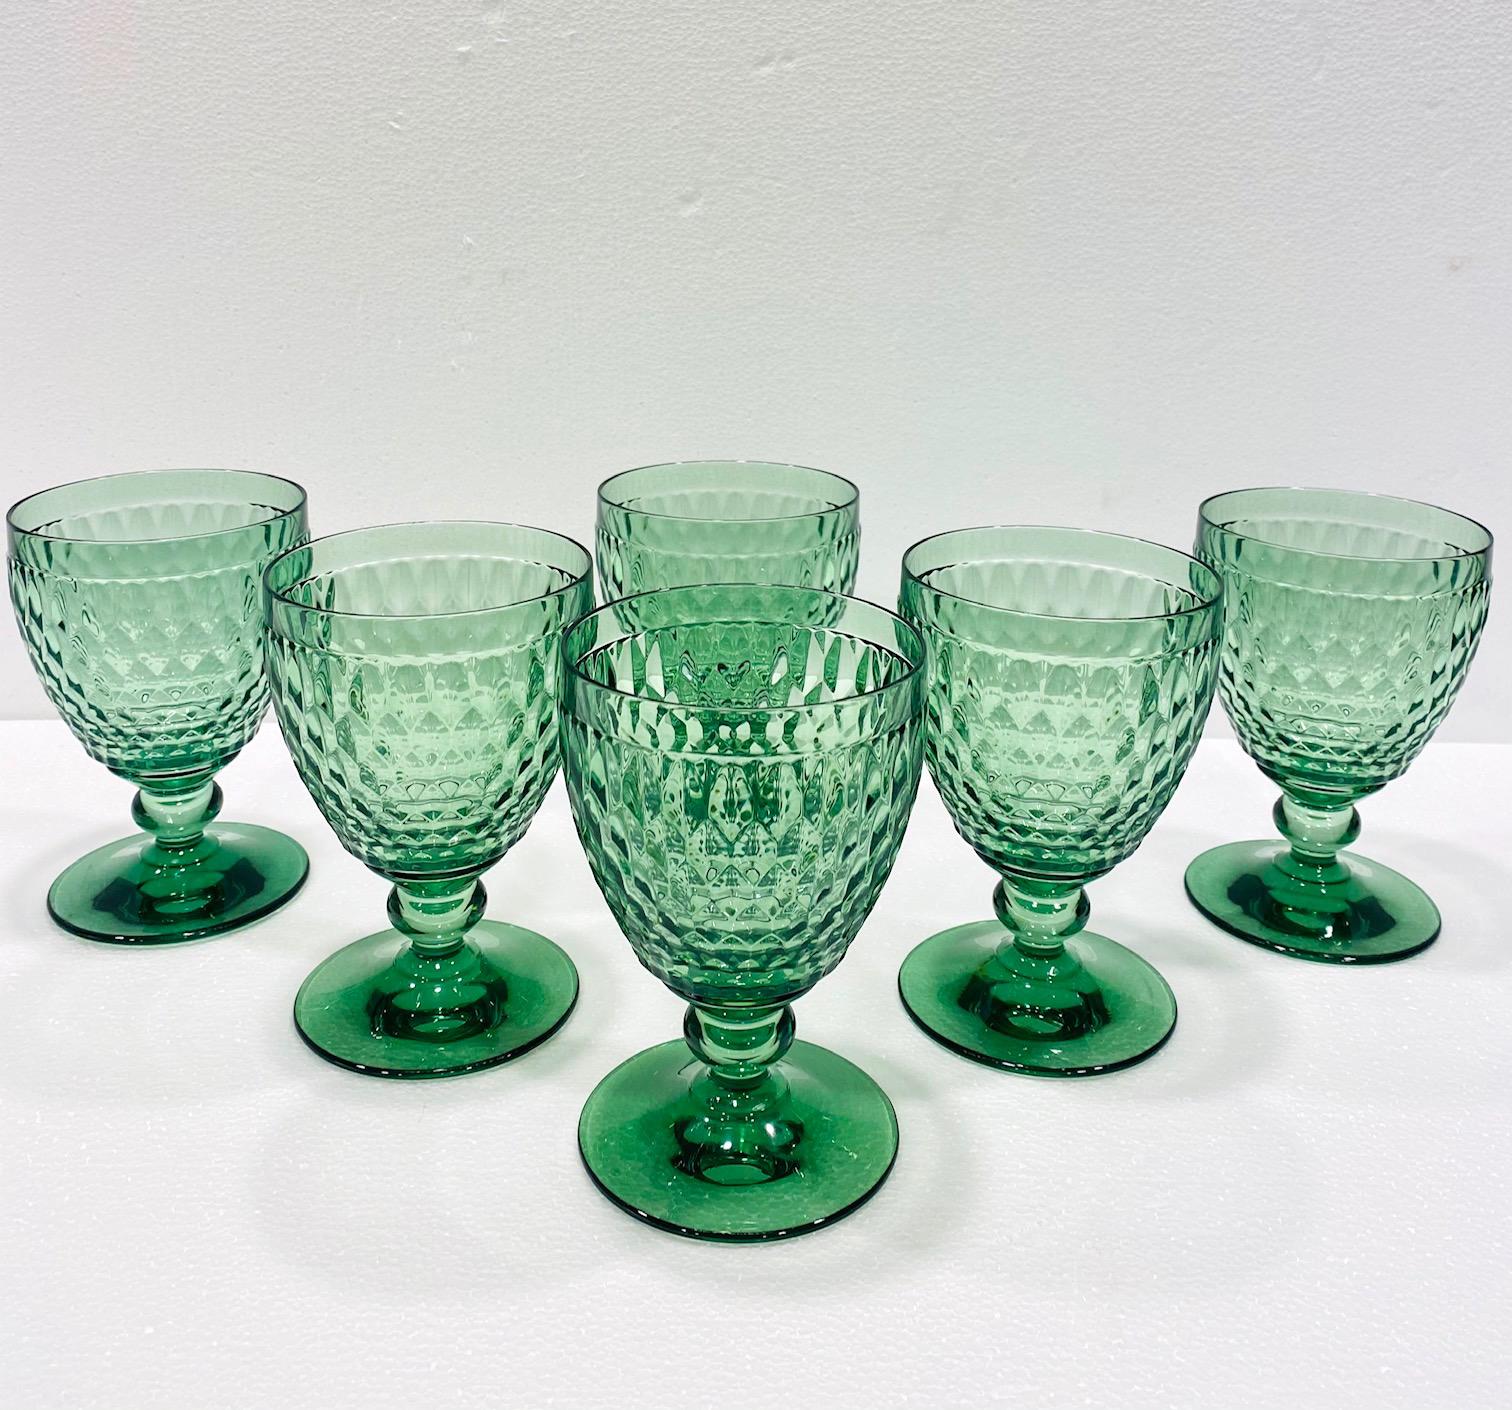 Set of six German crystal goblets from Villeroy & Boch. Blown glass stemware featuring hobnail crystal with classic diamond pattern. Designed with deliberate short stems with glass ball accent in a beautiful emerald green. Each glass in signed